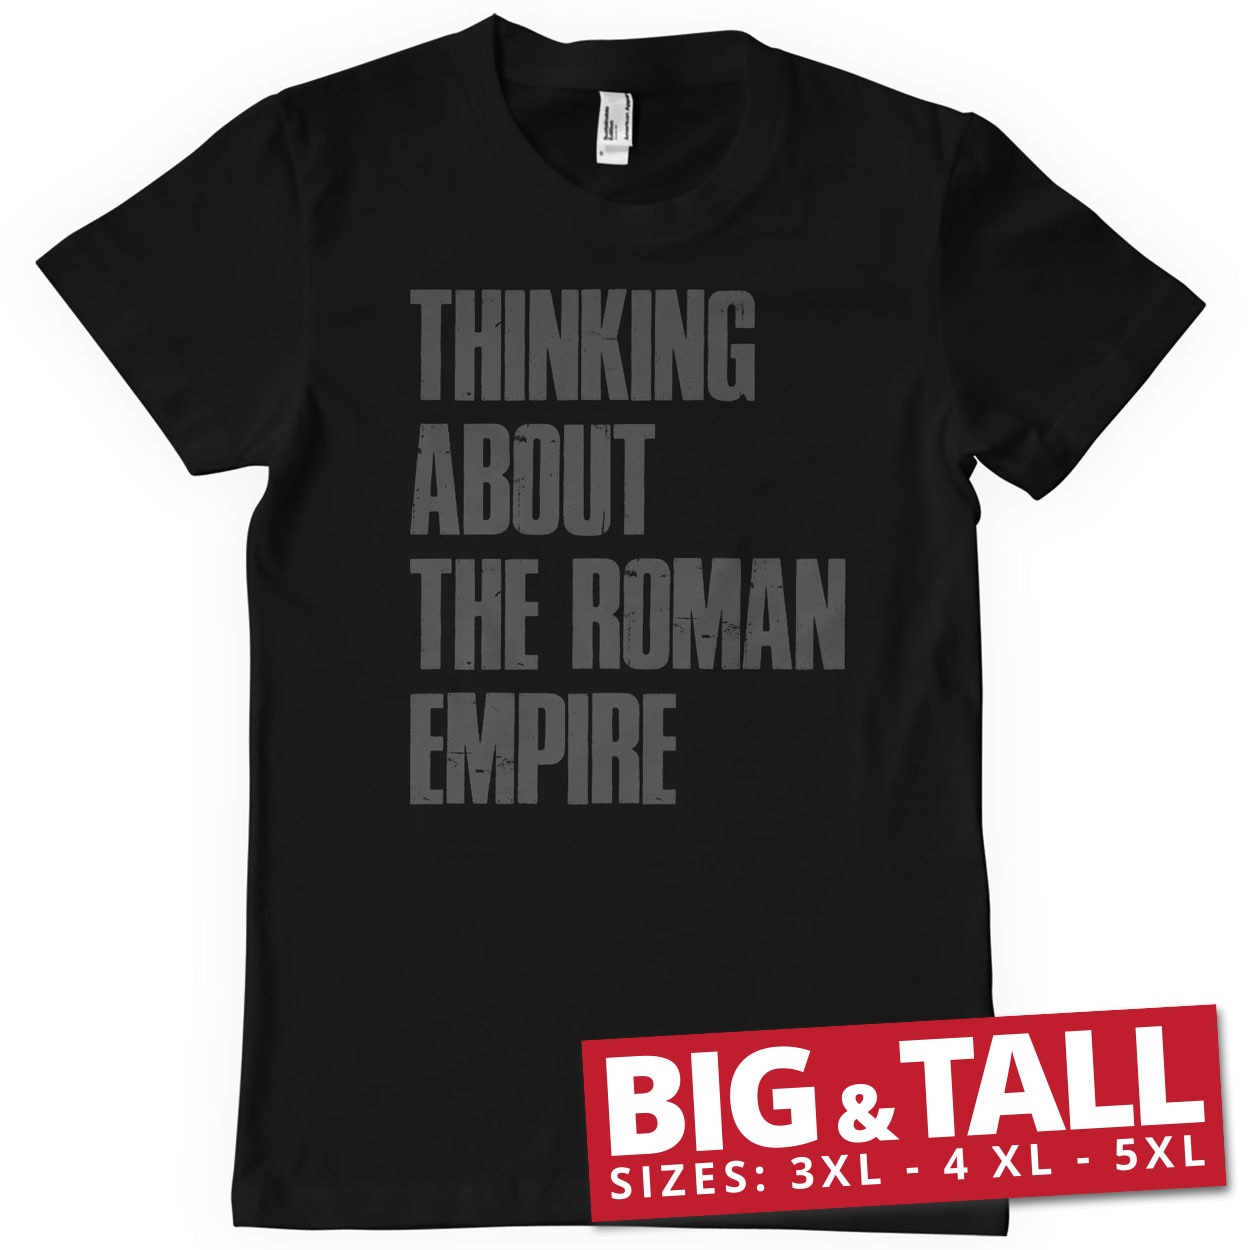 Thinking About The Roman Empire Big & Tall T-Shirt